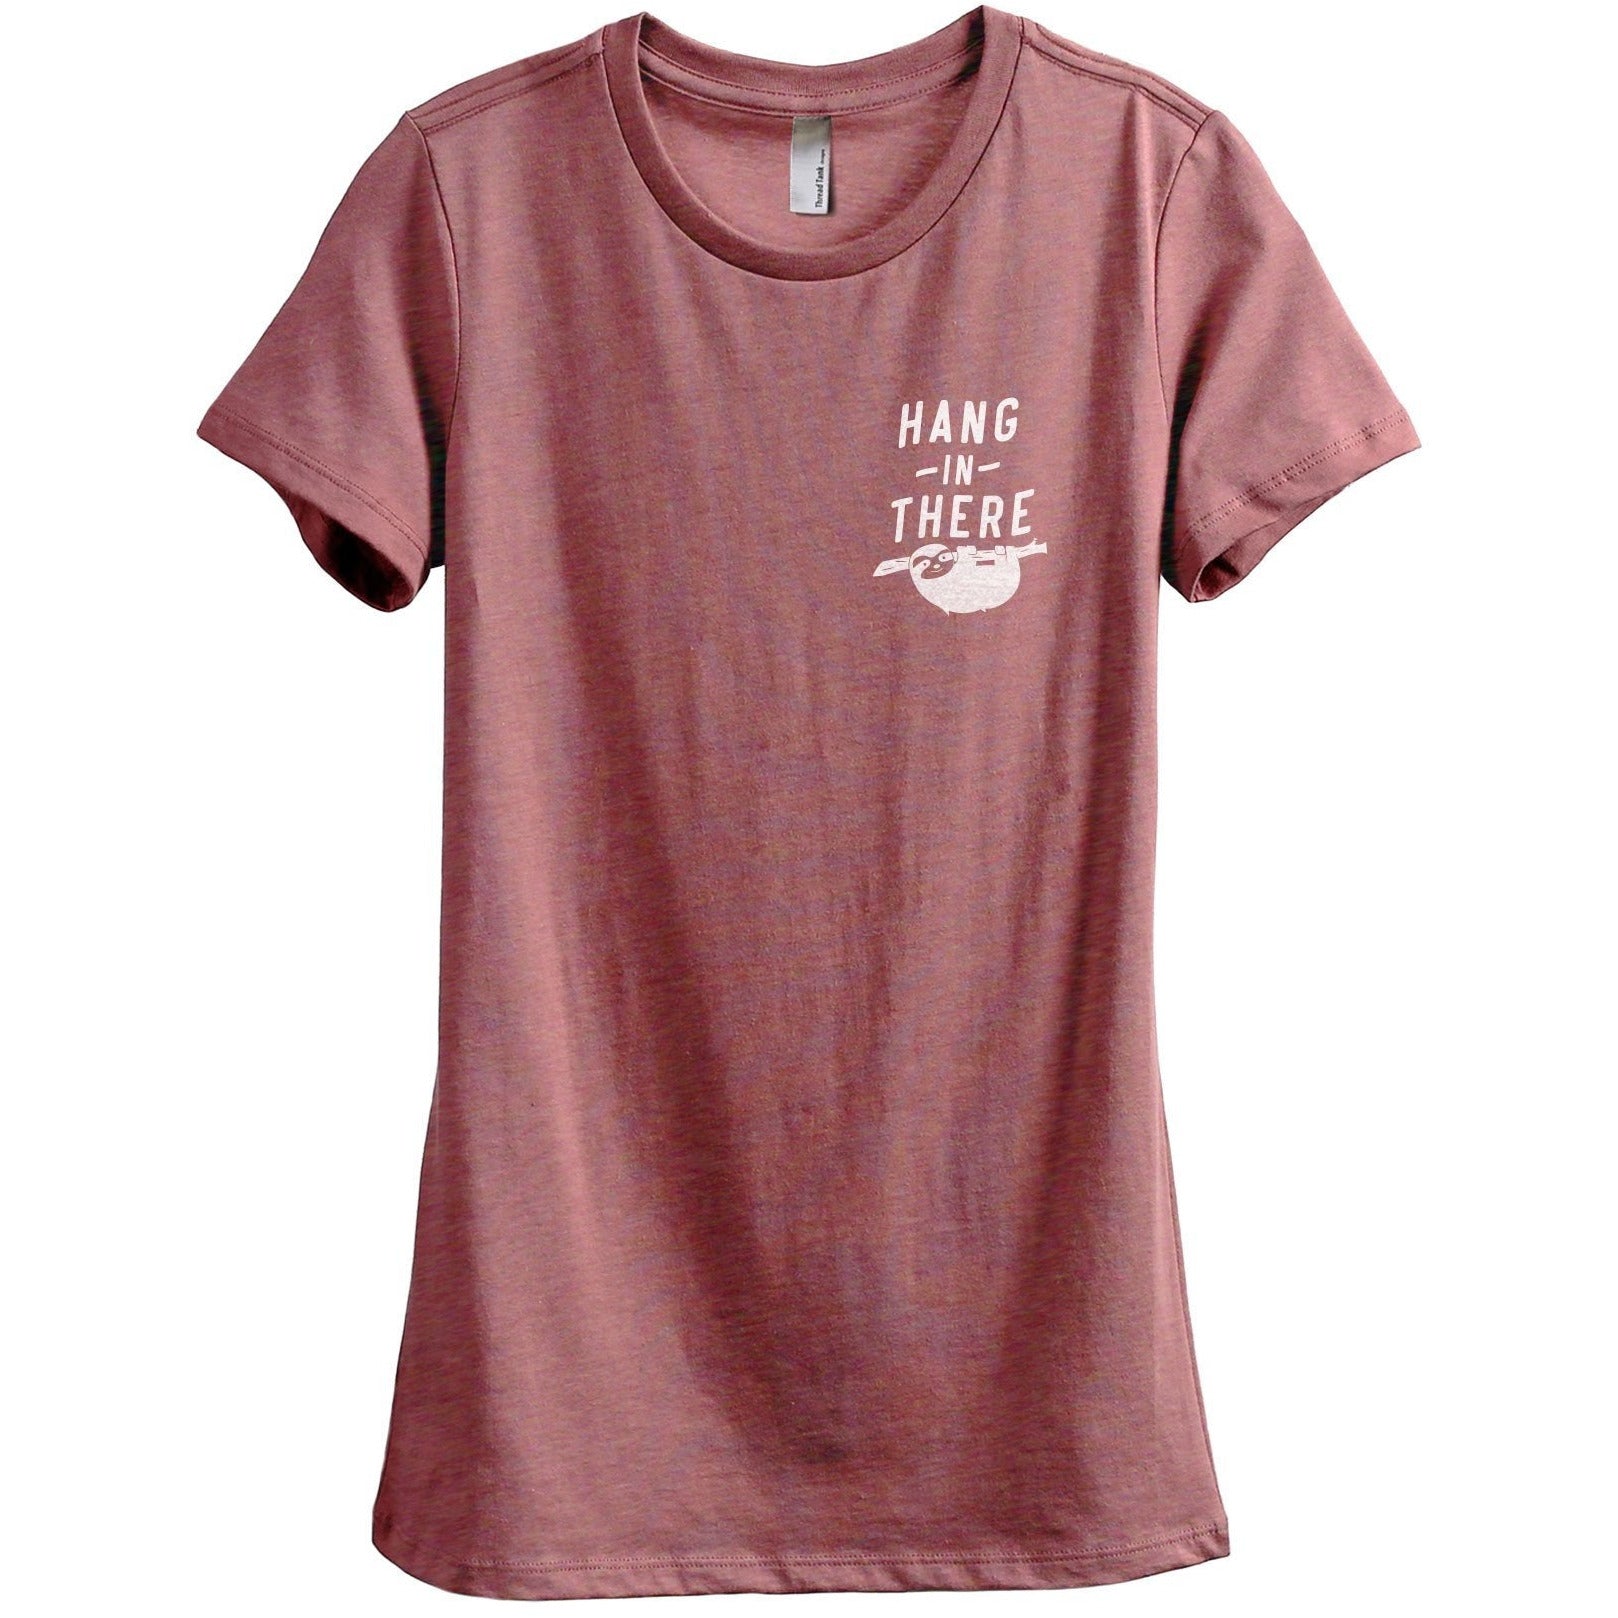 Hang In There Women's Relaxed Crewneck T-Shirt Top Tee Heather Rouge